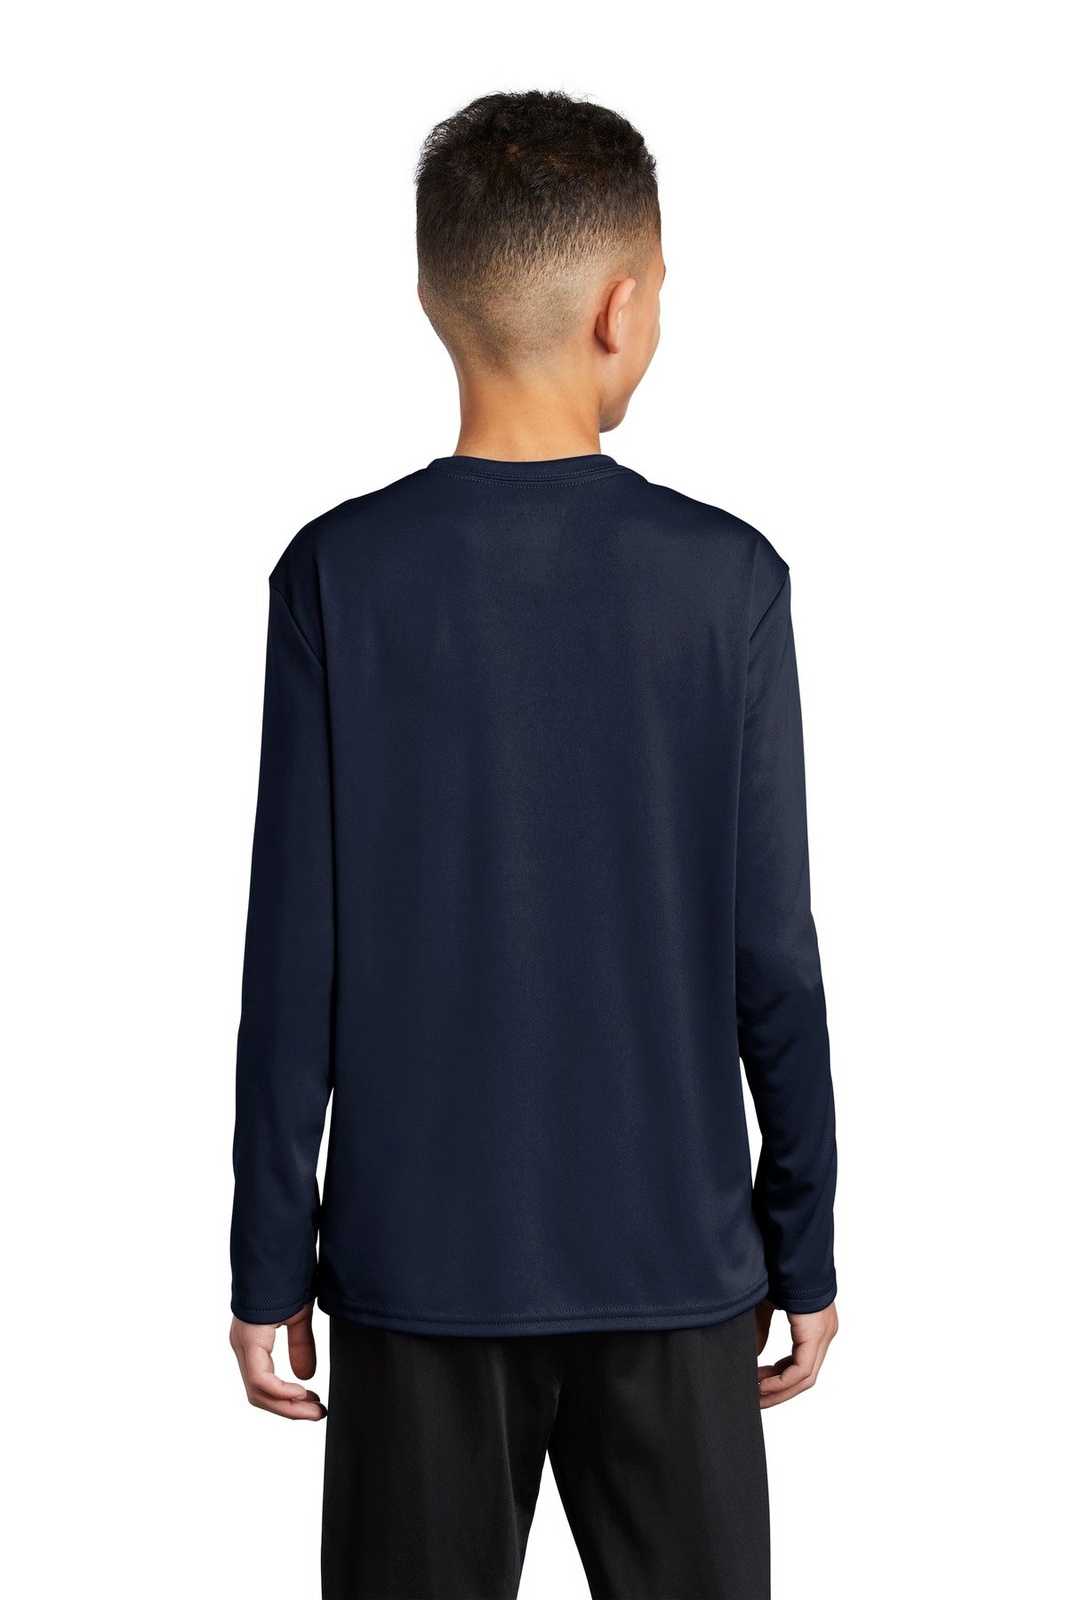 Port & Company PC380YLS Youth Long Sleeve Performance Tee - Deep Navy - HIT a Double - 1